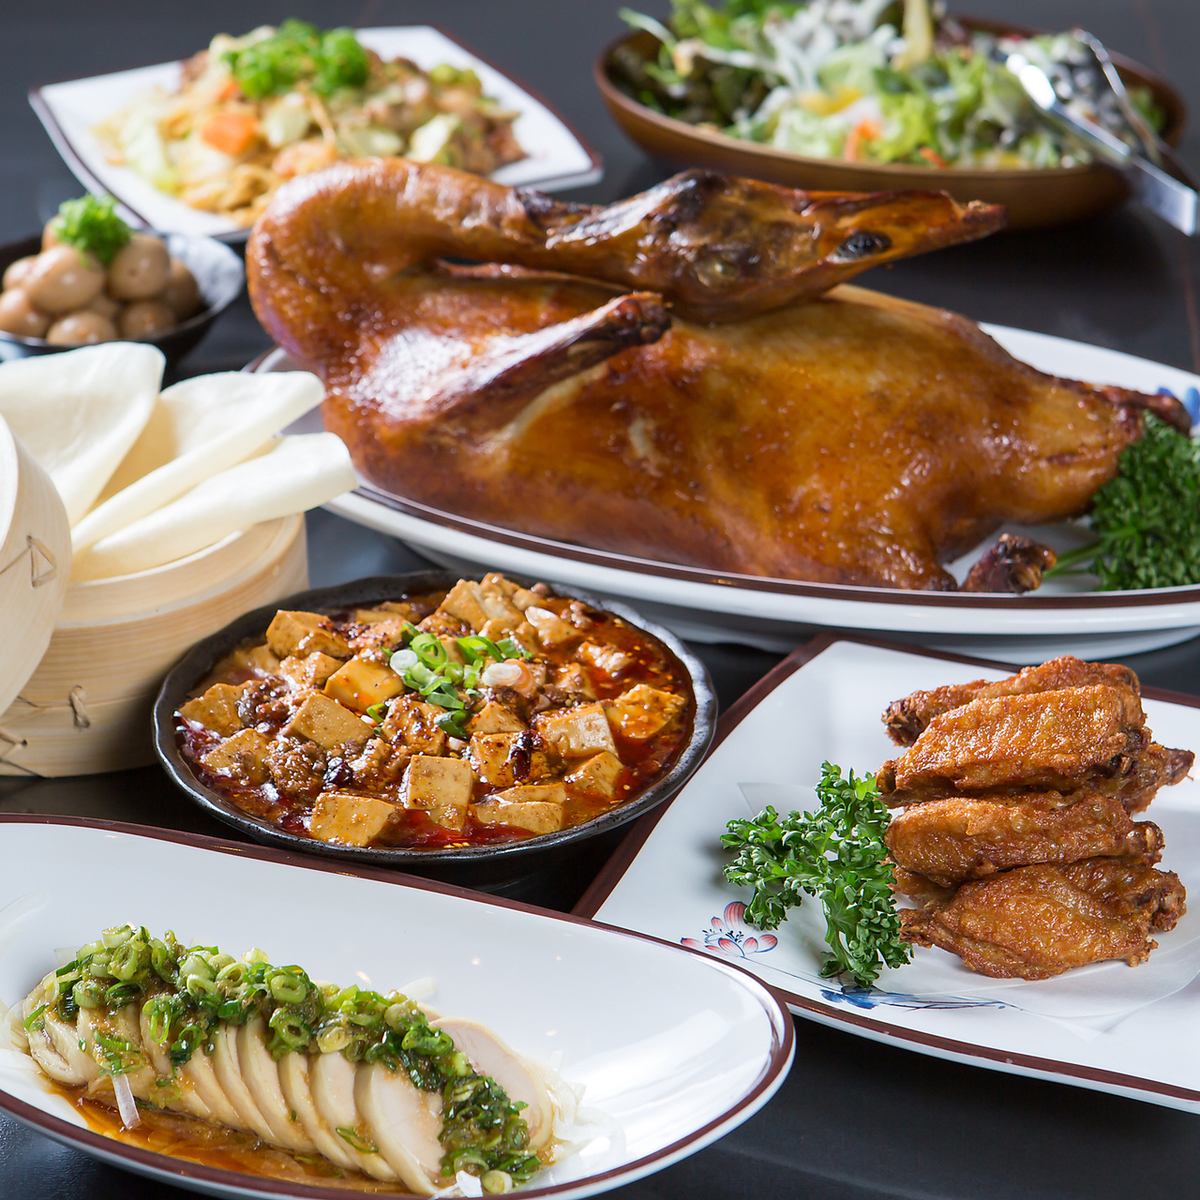 In addition to Chinese cuisine, you can enjoy a wide variety of dishes and alcoholic beverages at your leisure.